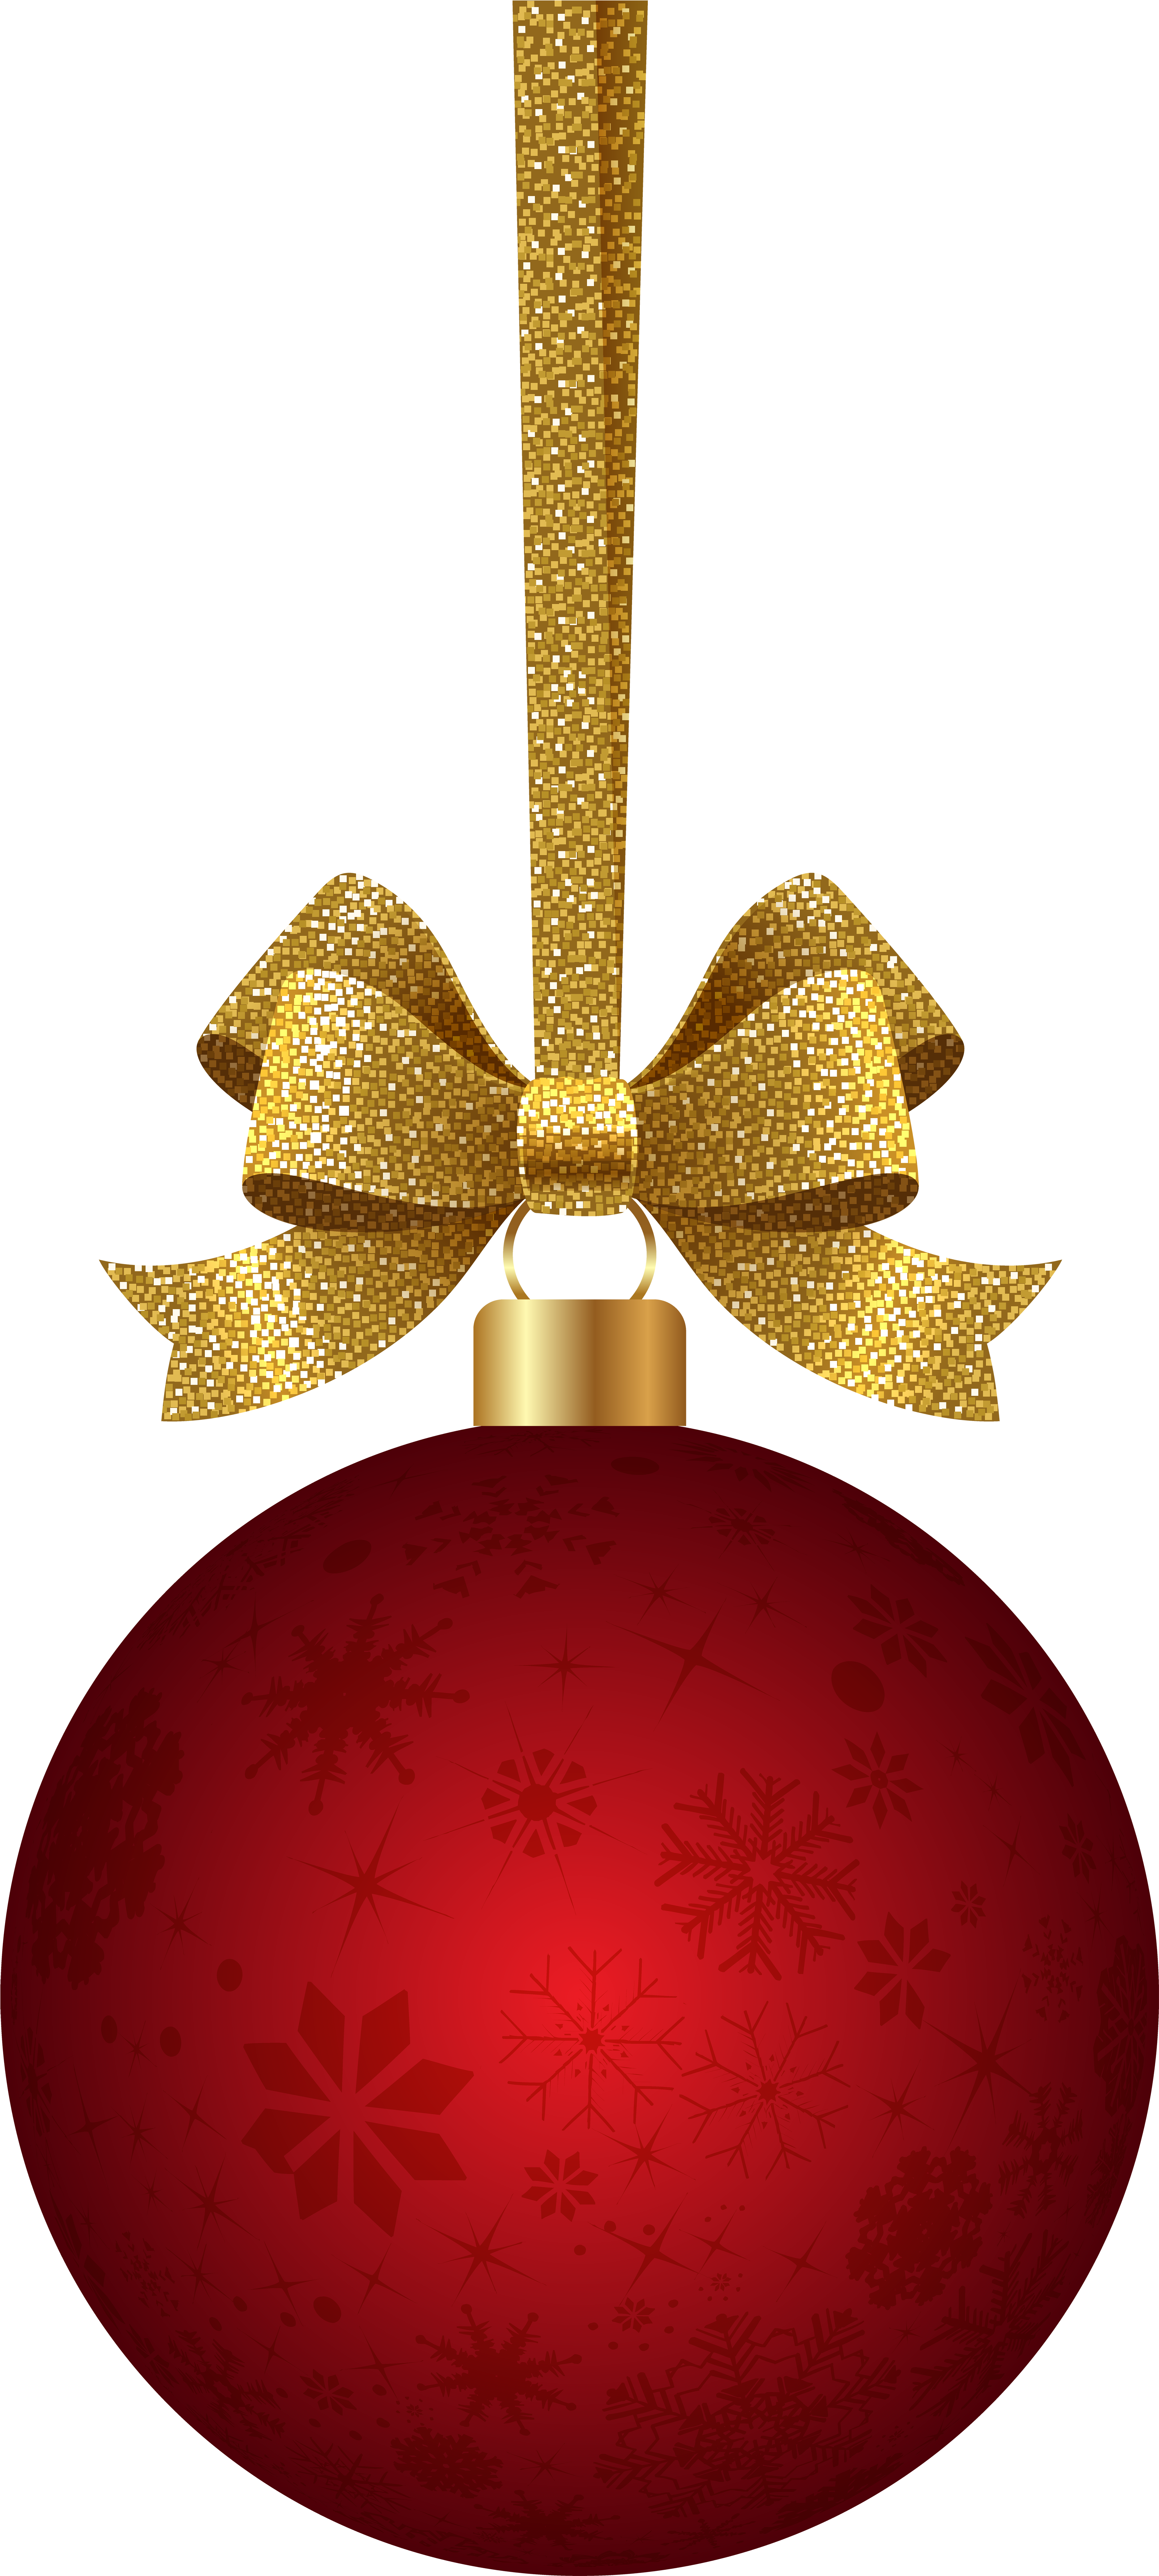 Christmas Classic Red Hanging Ball Png Clipart Image Gallery | Images ...